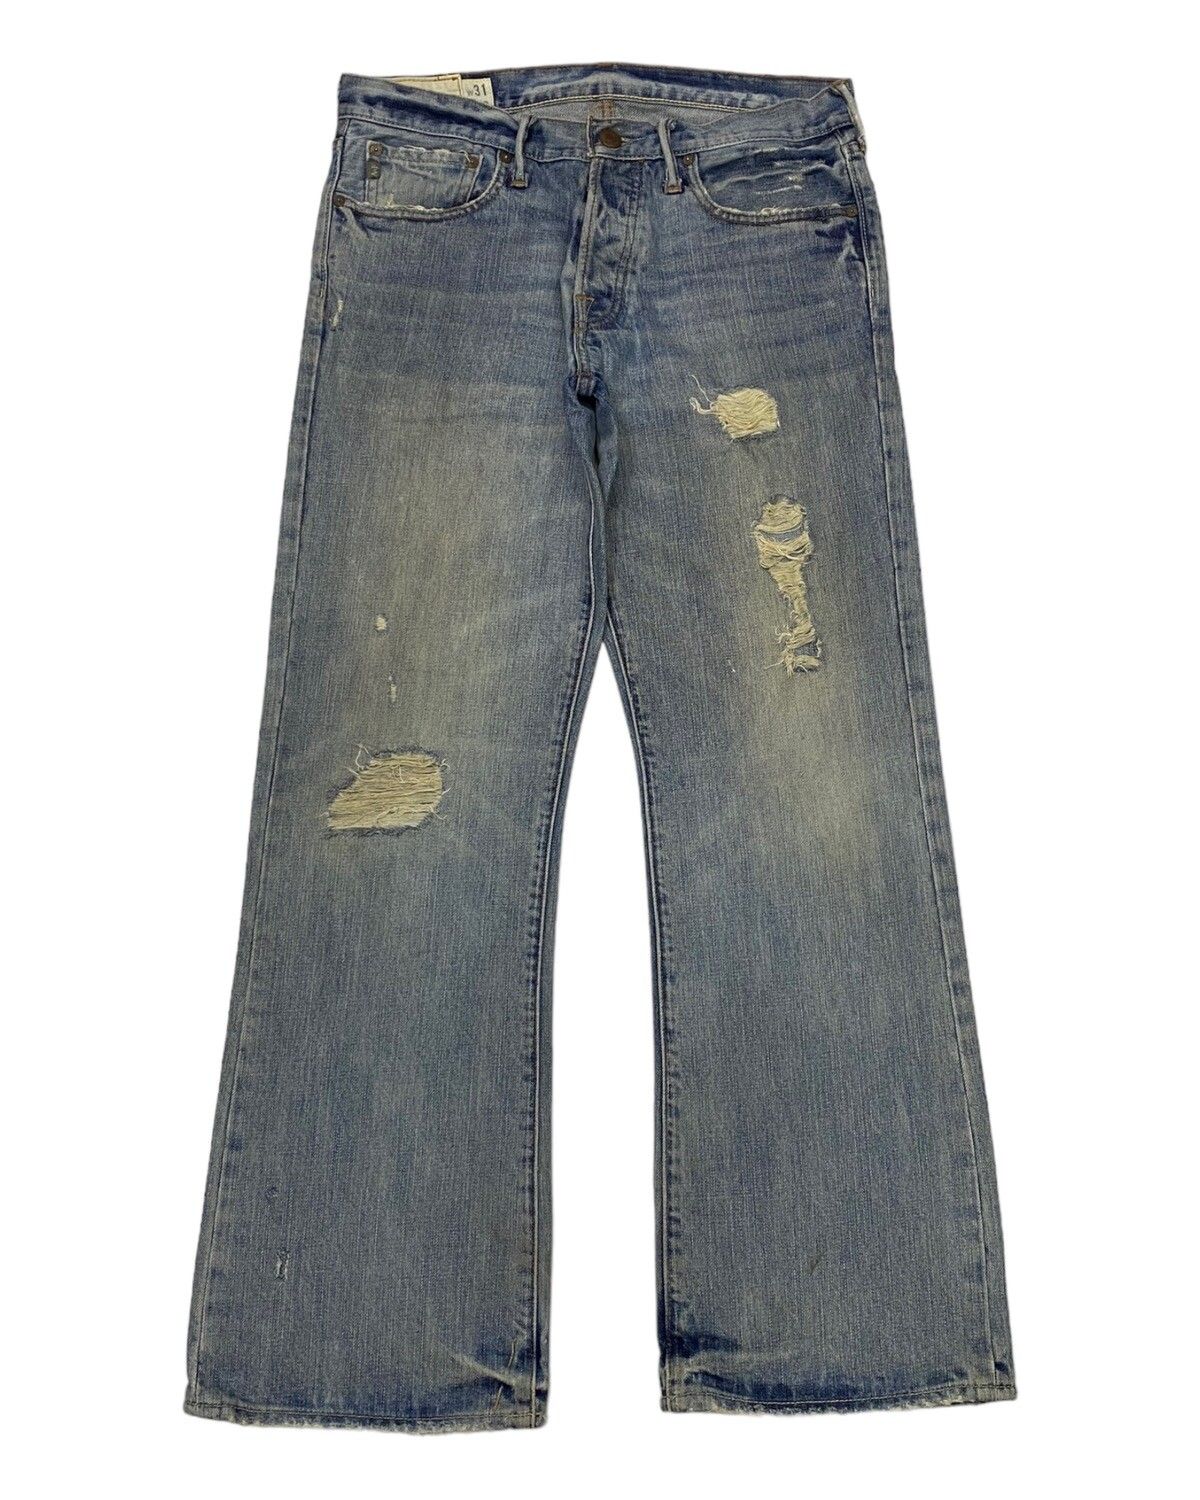 RARE🔥ABERCROMBIE & FITCH LOW RISE BOOTCUT FLARE JEANS - 2